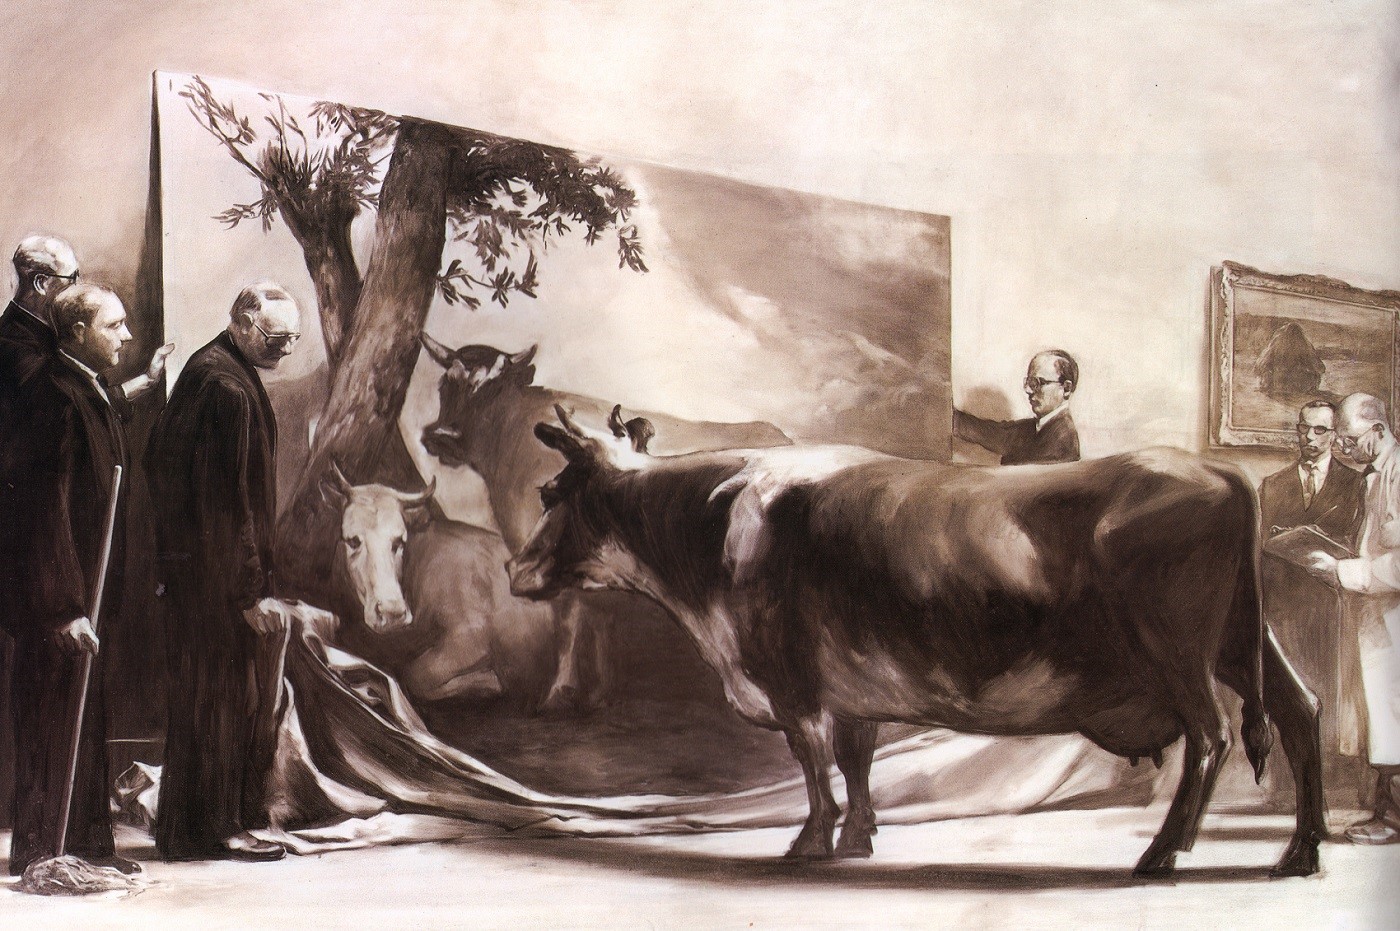 The painting, The Innocent Eye Test, by Mark Tansey which shows a cow being shown a painting of other cows by a group of men